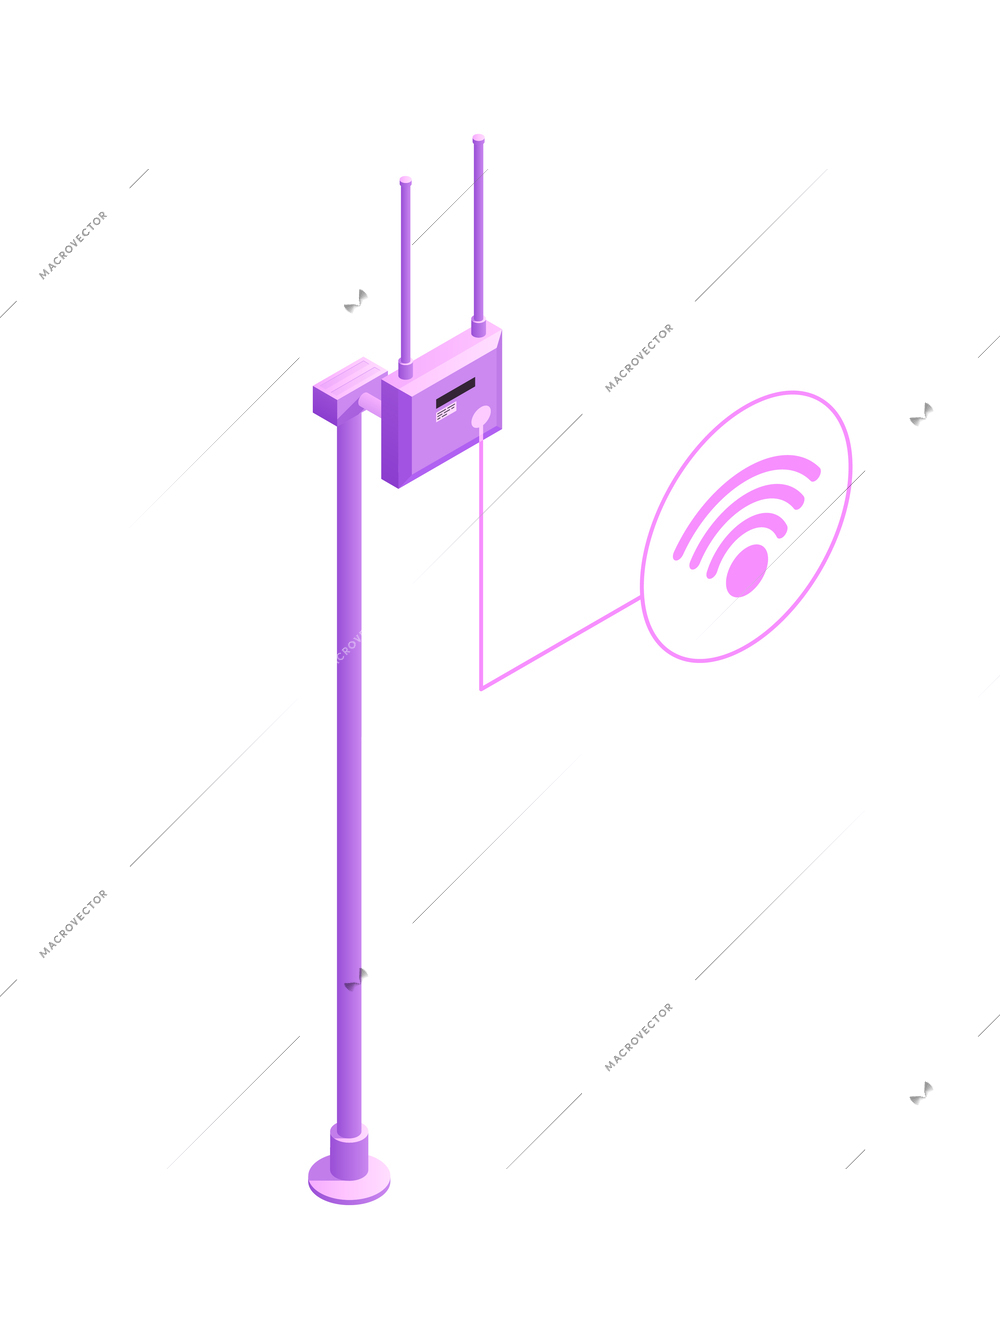 Global network internet data transfer technology glow composition with neon icon of infrastructure vector illustration